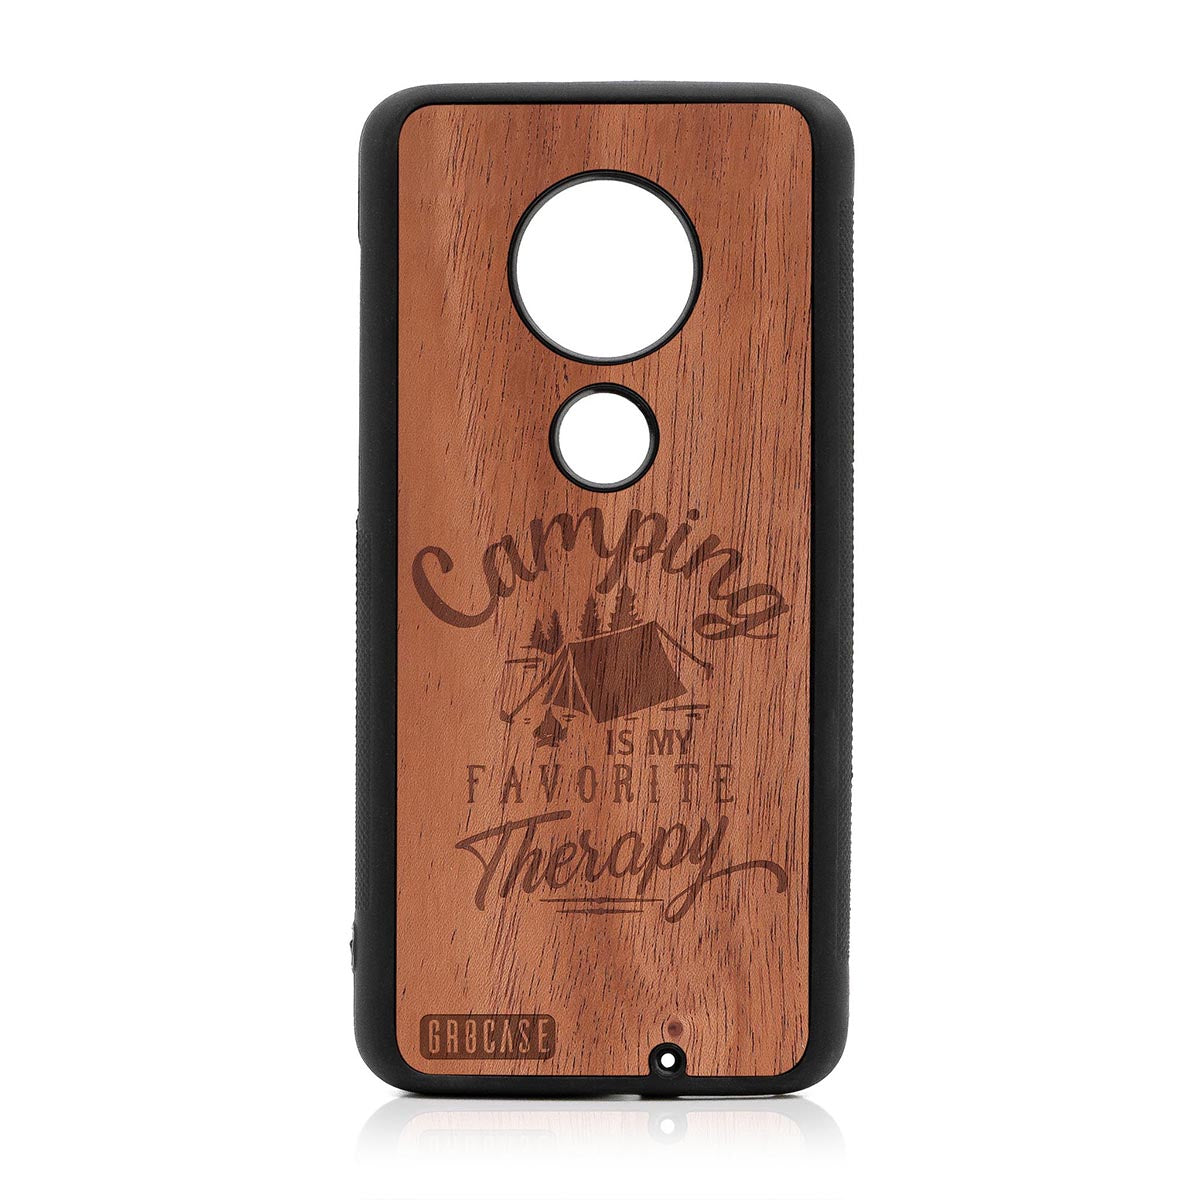 Camping Is My Favorite Therapy Design Wood Case Moto G7 Plus by GR8CASE